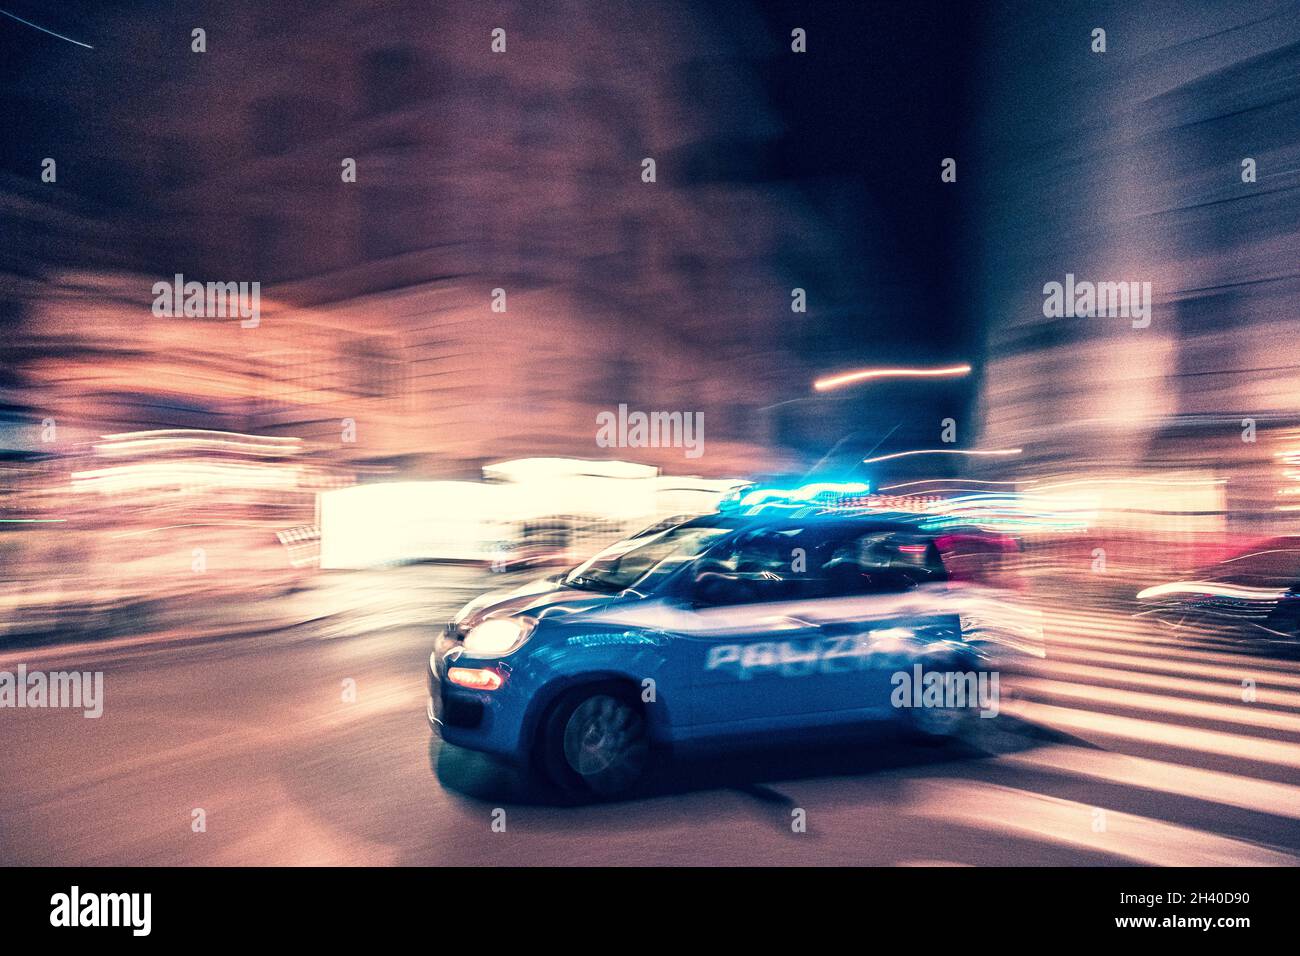 Police car in motion in Rome Italy, blurred background Stock Photo